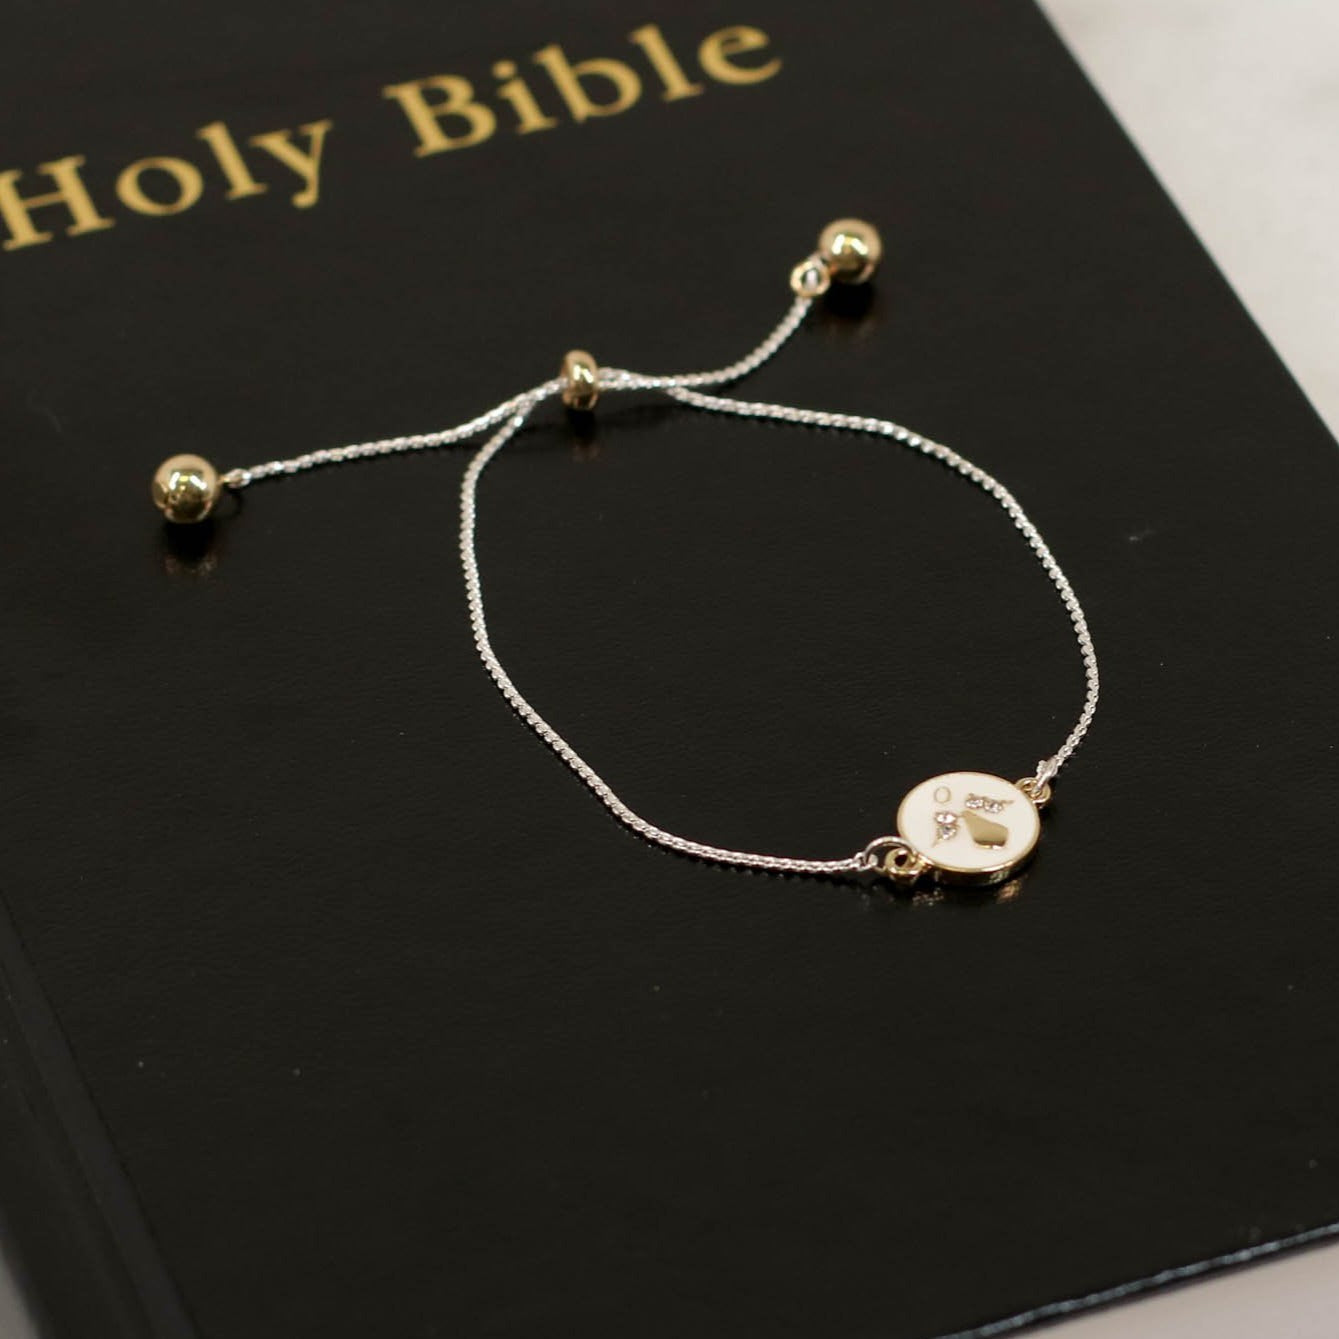 15 Christian Gifts Under $5 (Cheap yet Thoughtful! Click here) – Christian  Walls